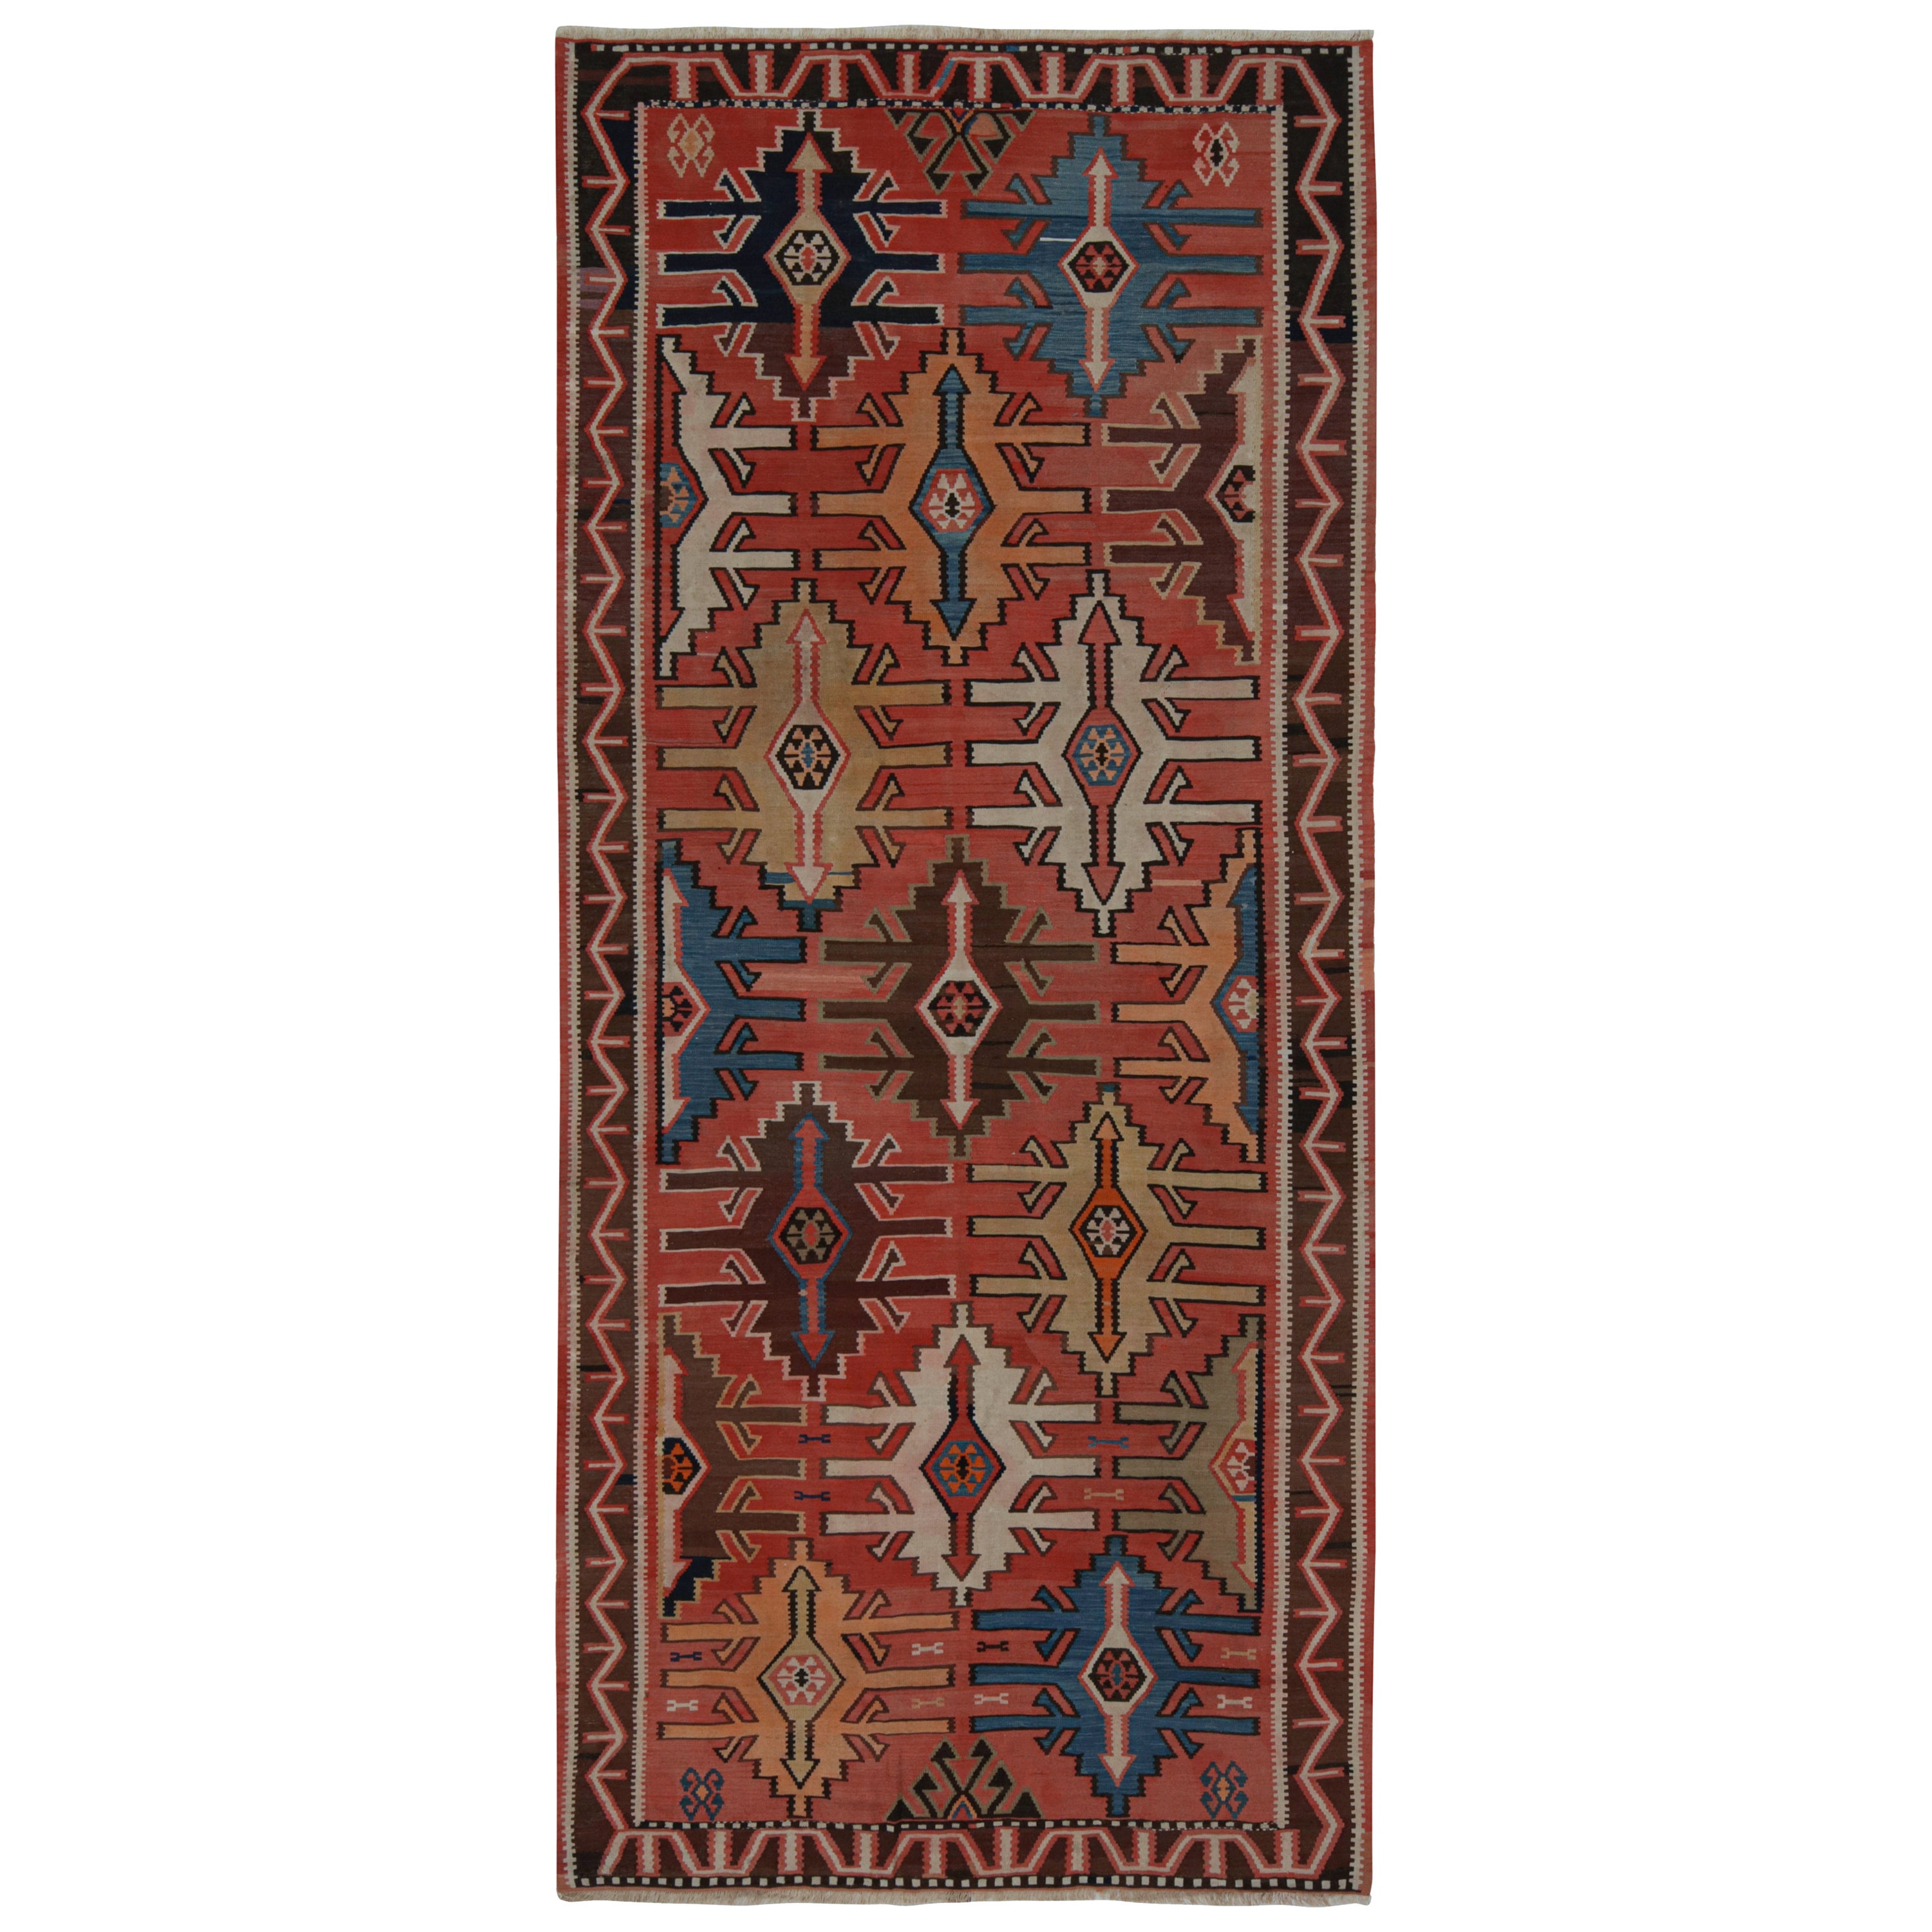 Vintage Persian Kilim in Red with Polychromatic Patterns, from Rug & Kilim